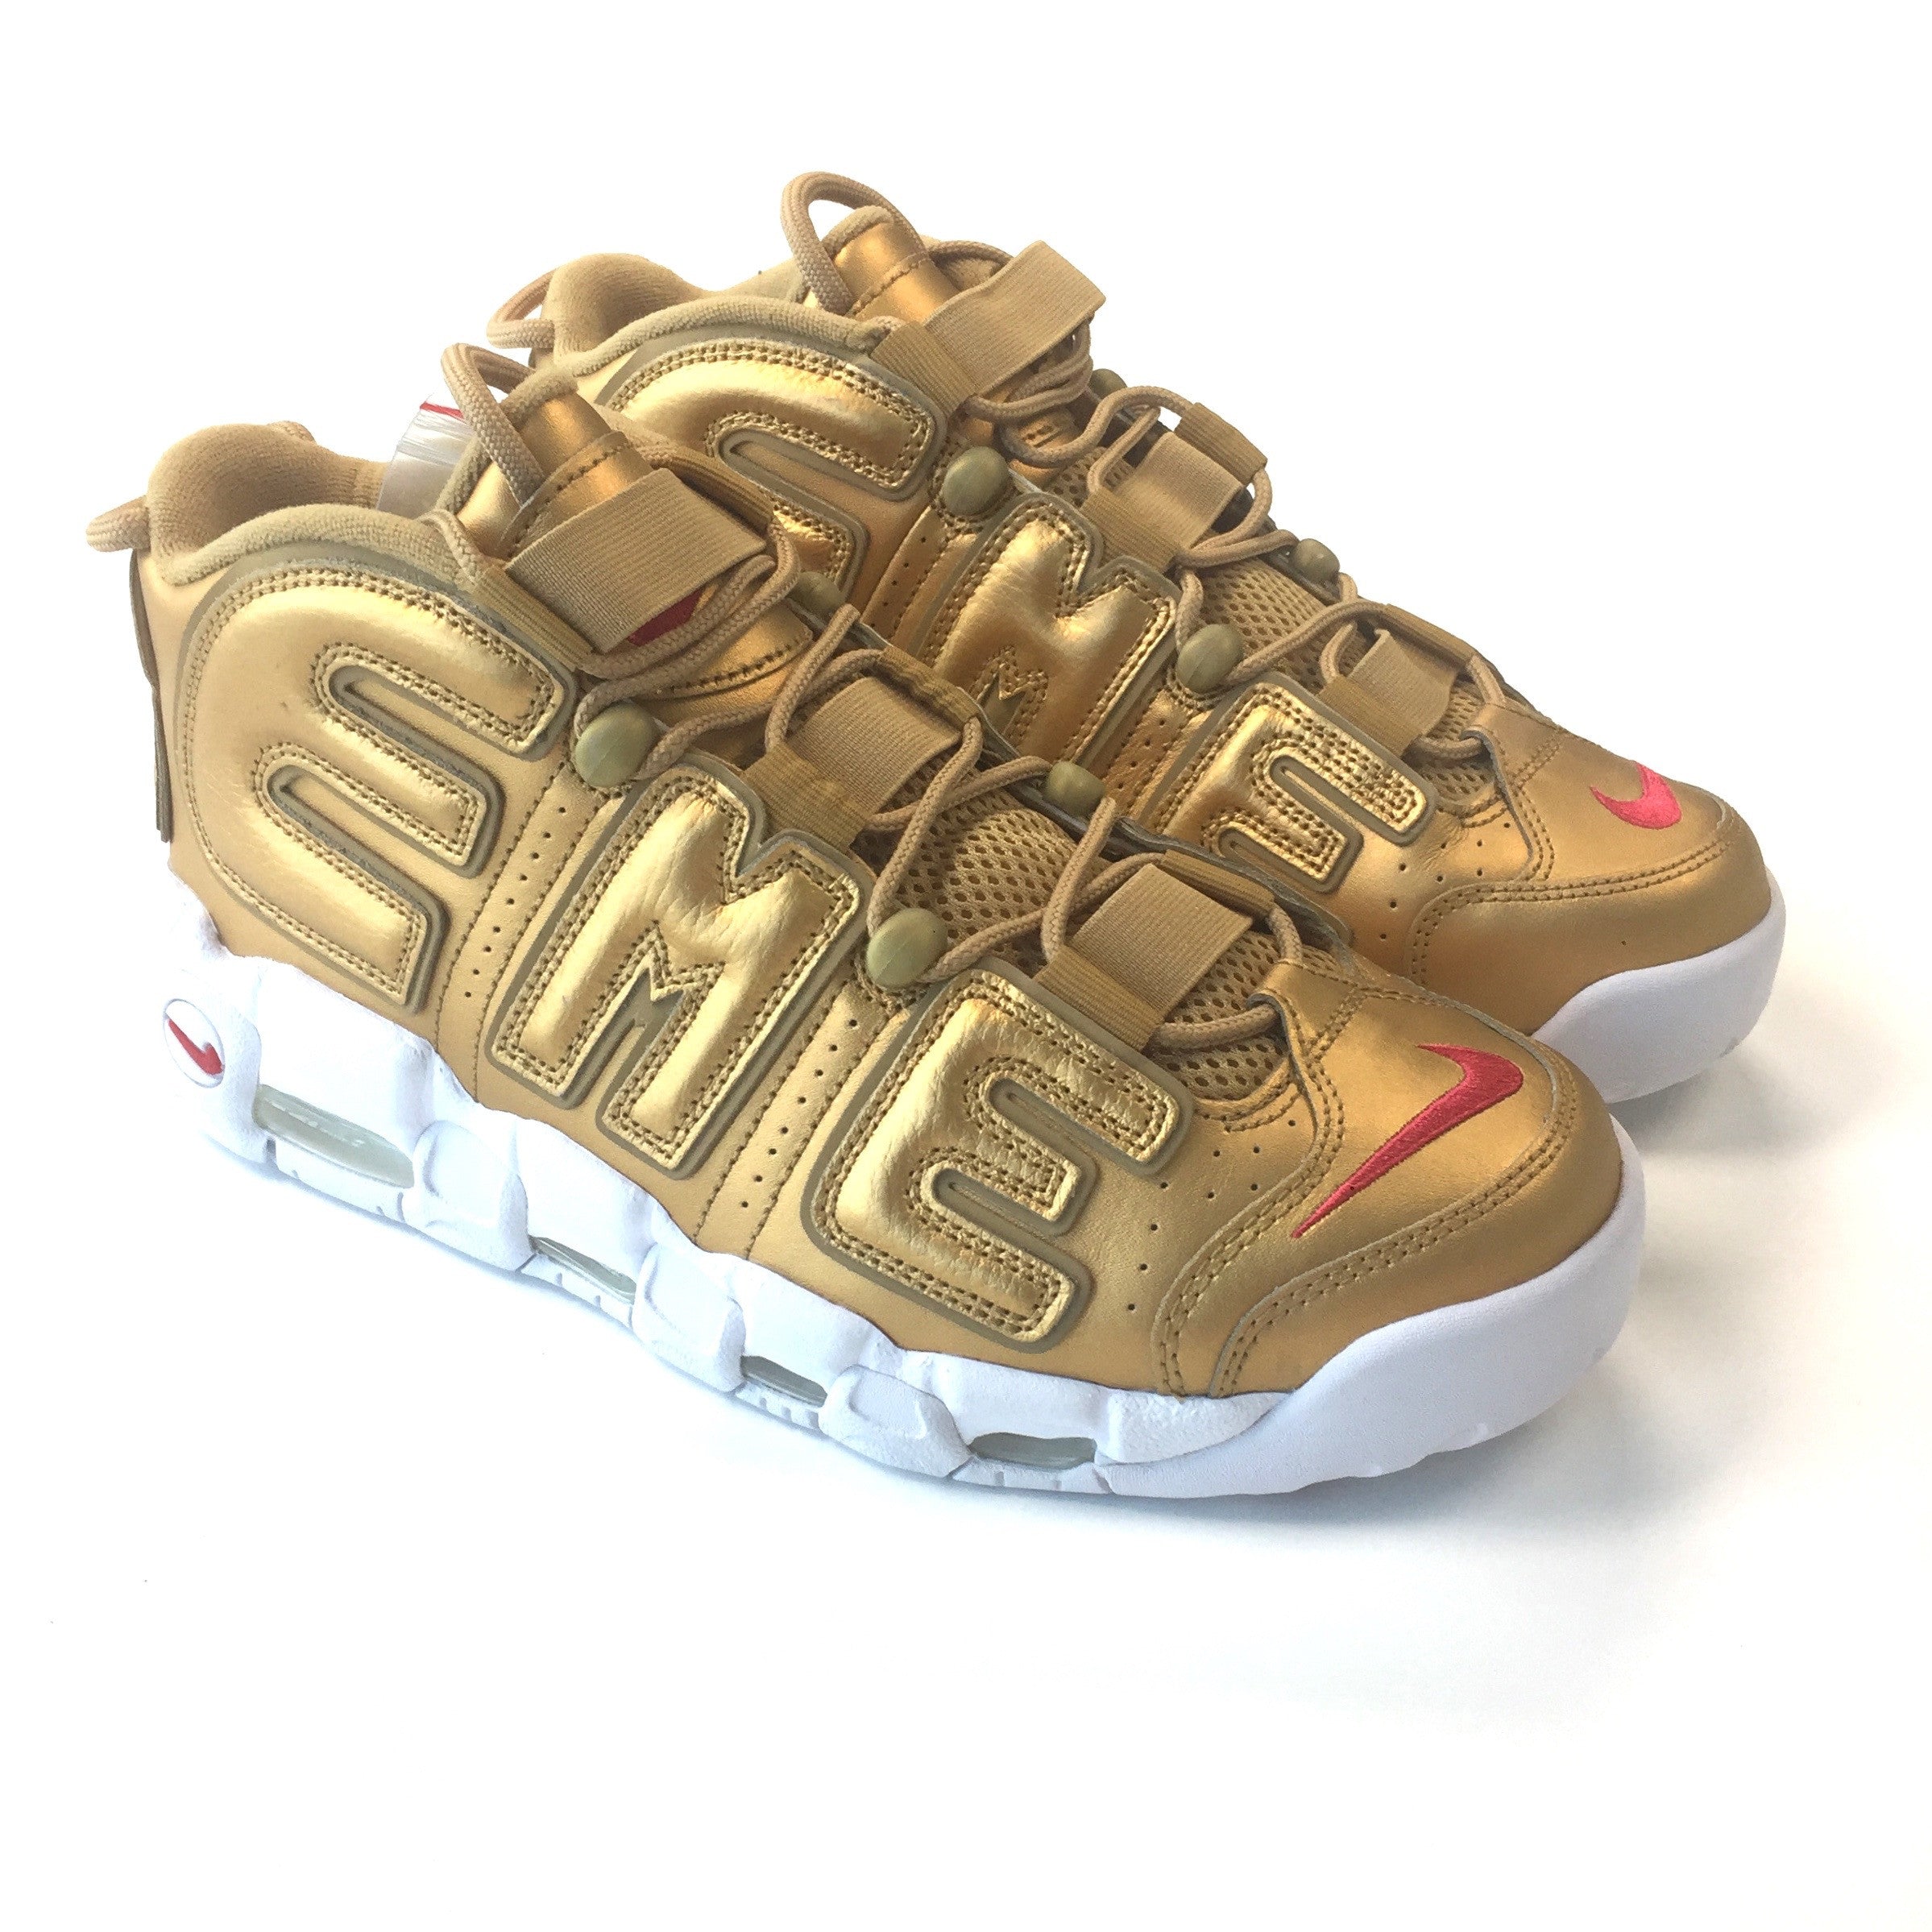 Nike Air uptempo supreme gold size 13s